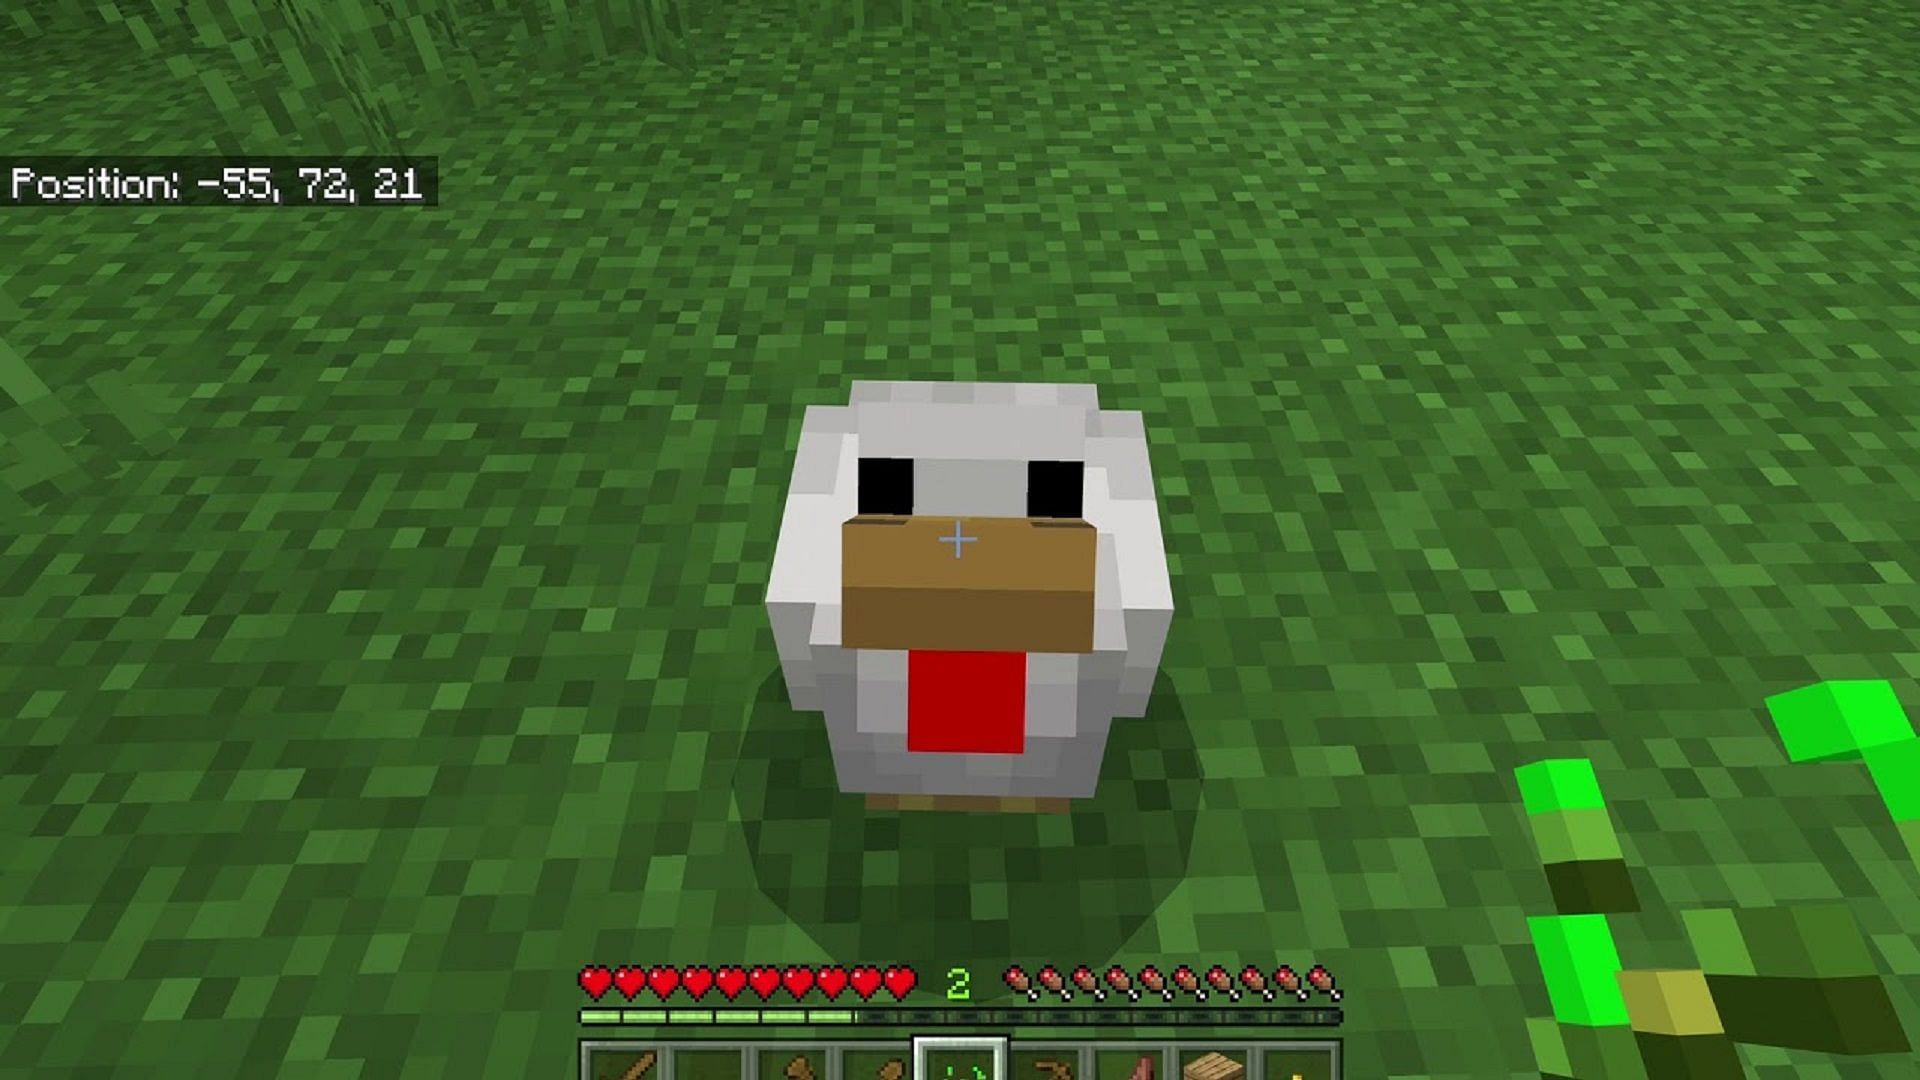 Sometimes, farming chickens in Minecraft doesn